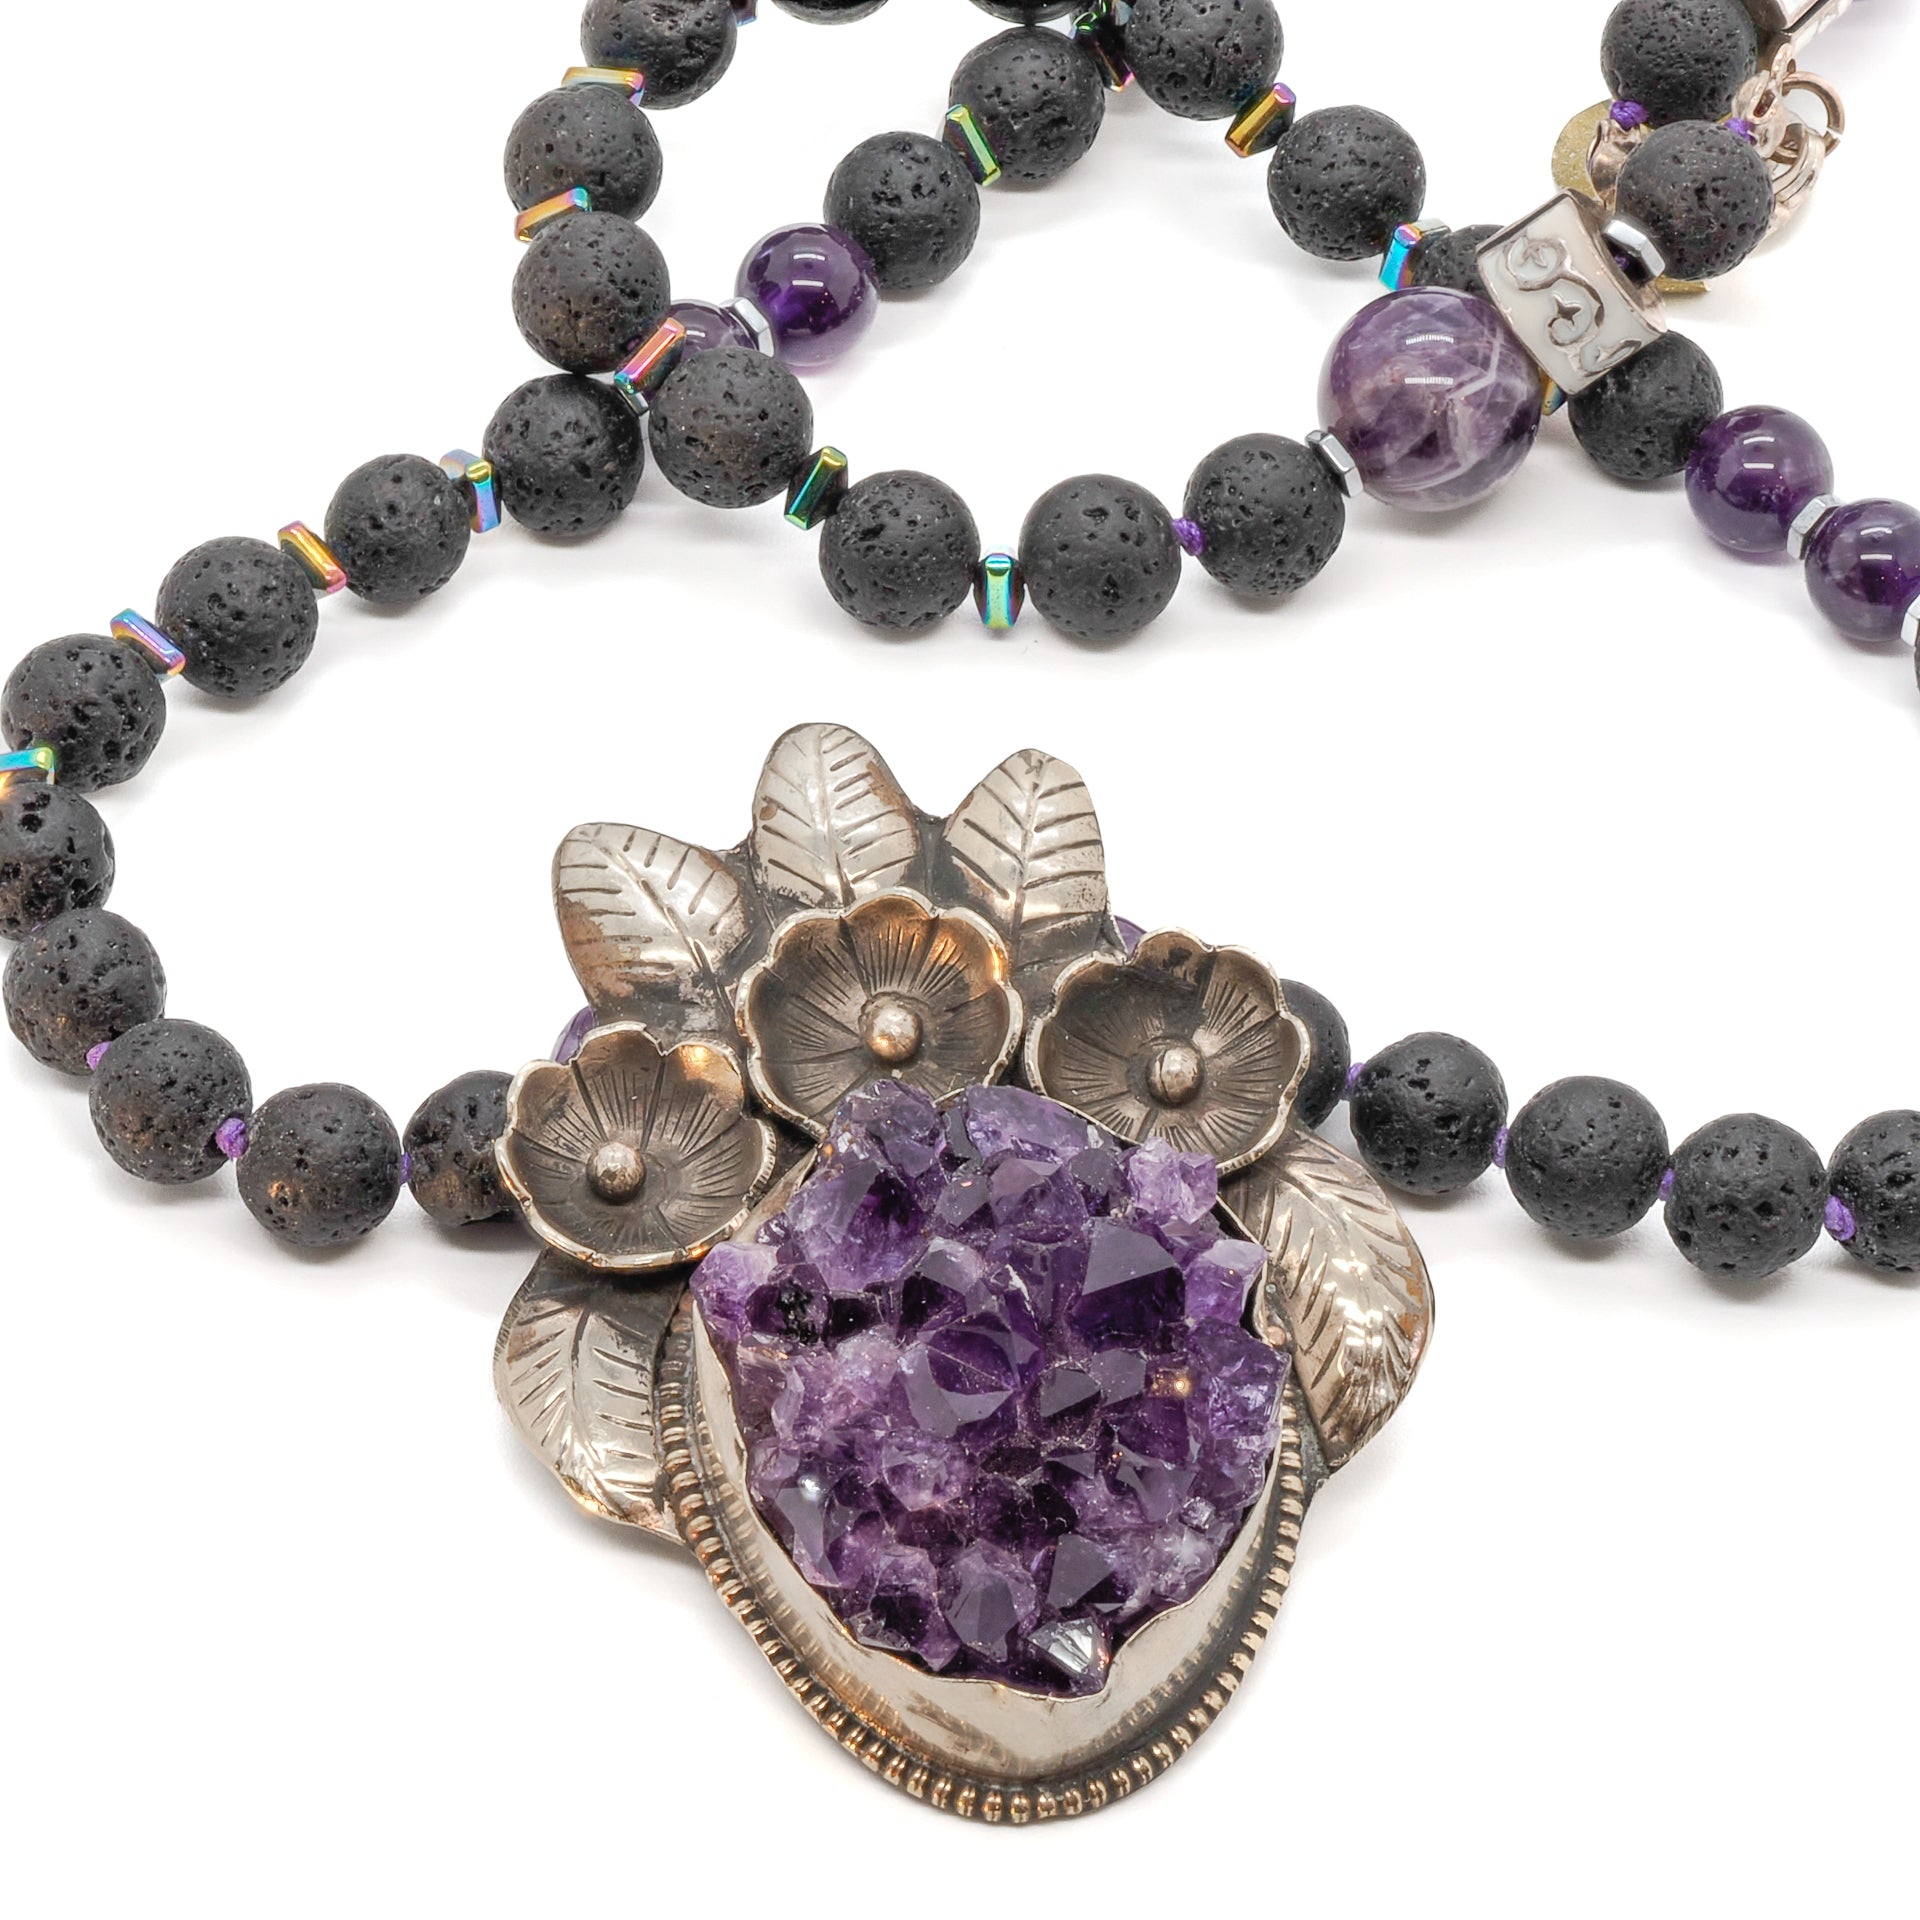 Handmade necklace featuring a stunning combination of amethyst and lava rock stones for spiritual healing and tranquility.